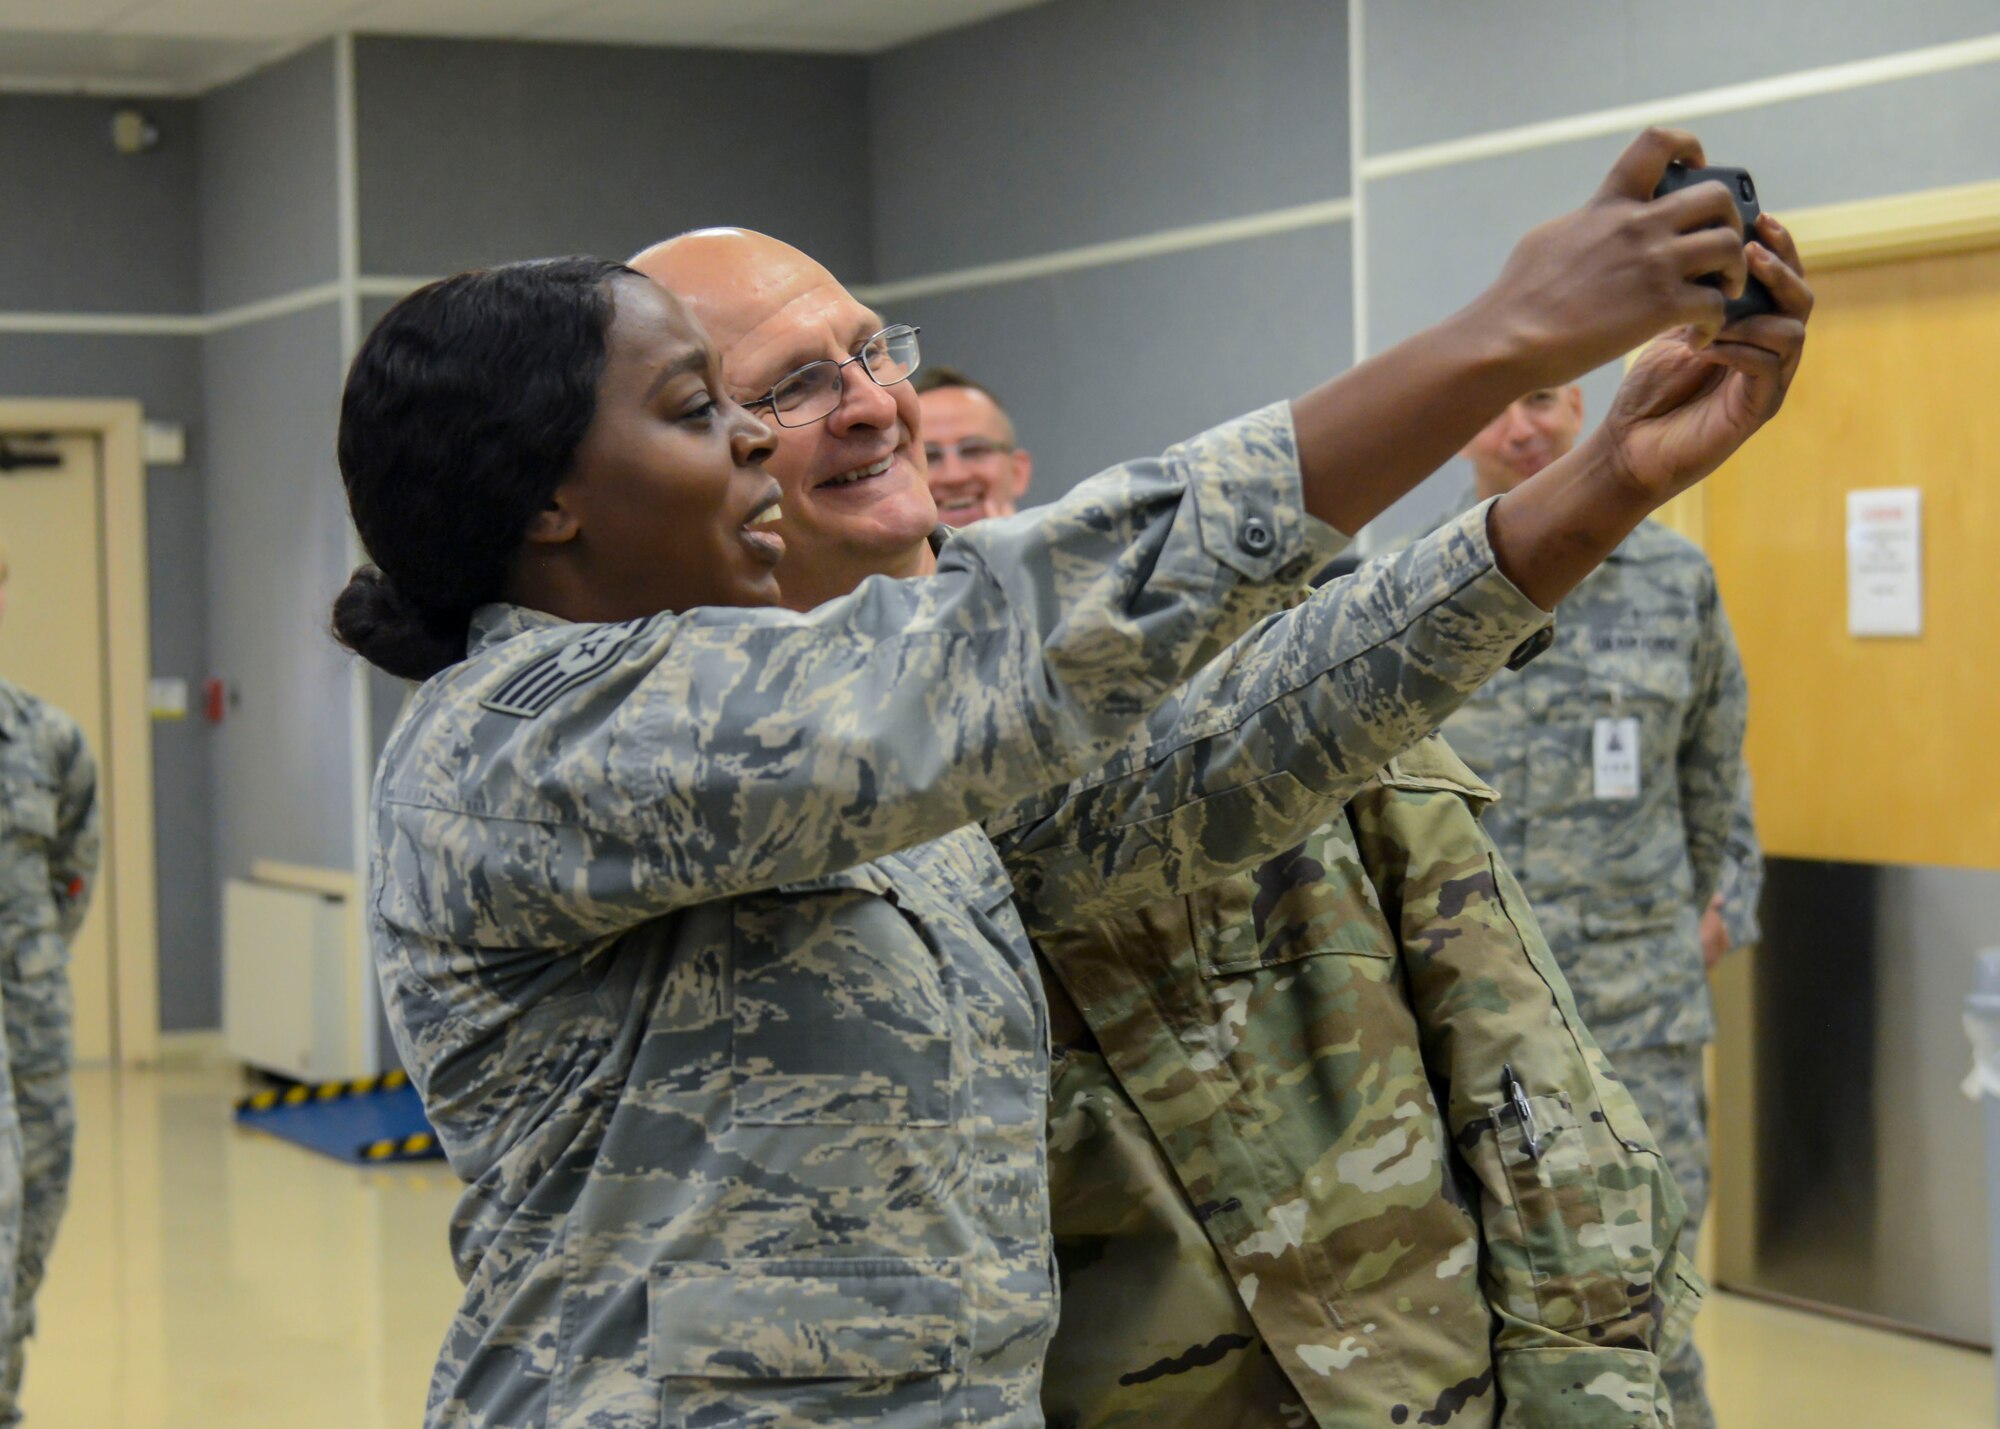 Staff Sgt. Ruth Elliot, 412th Medical Group, takes a “selfie” with Gen. Arnold Bunch, Commander, Air Force Materiel Command, at Edwards Air Force Base, California, Oct. 18. Elliot was a presented a commander’s coin by the AFMC commander. (U.S. Air Force photo by Giancarlo Casem)